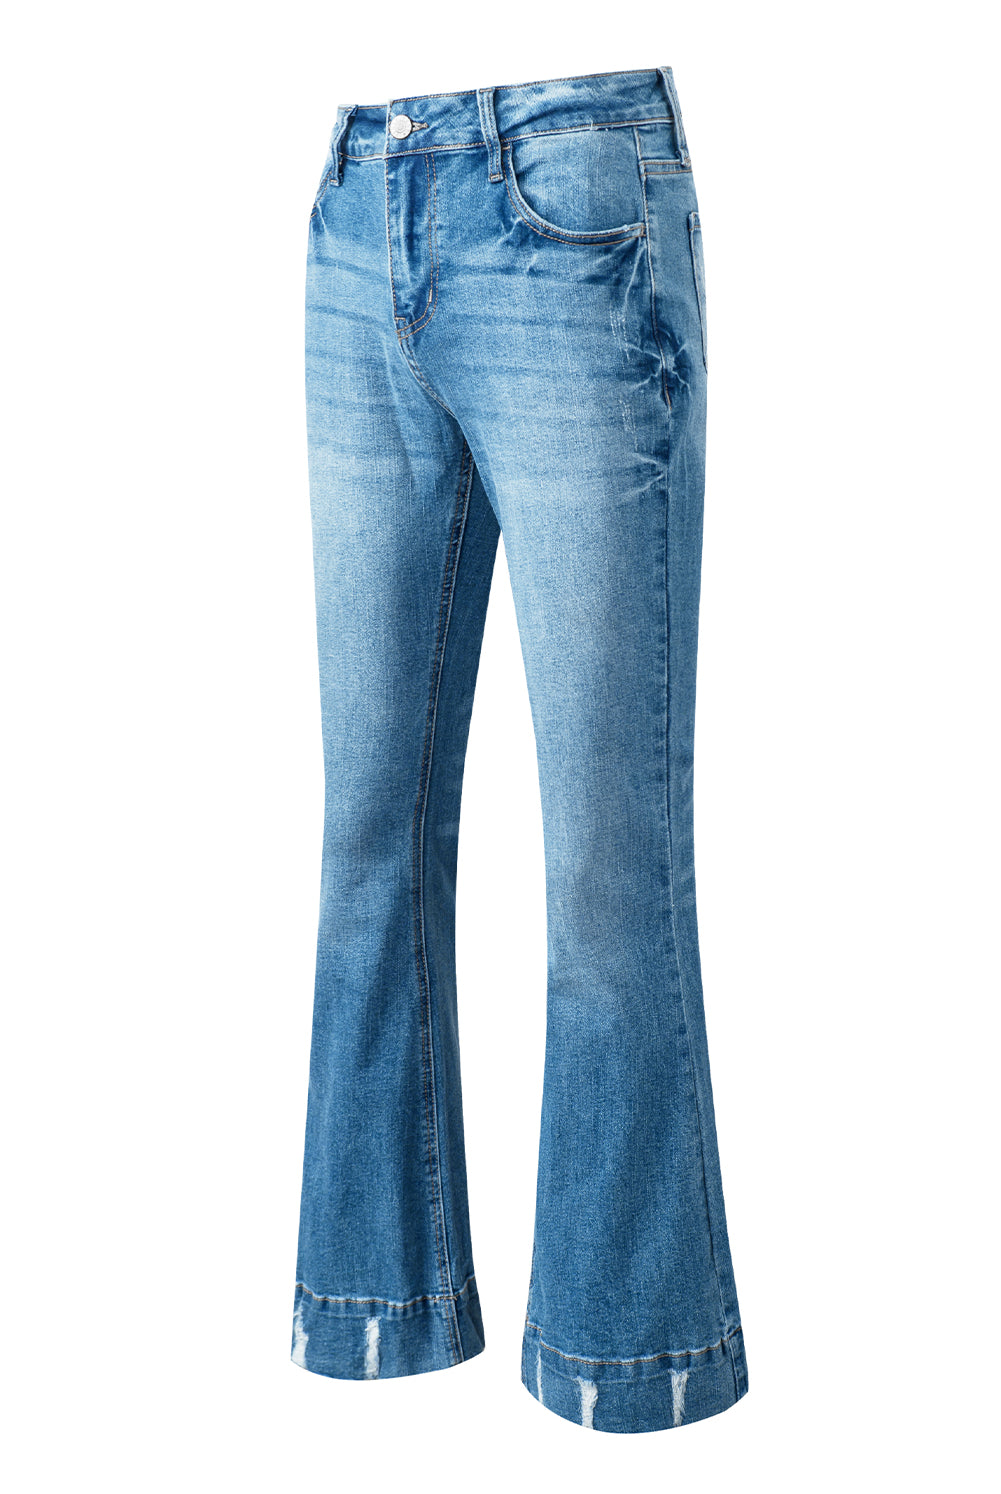 Steel Blue Cat's Whisker Bootcut Jeans with Pockets